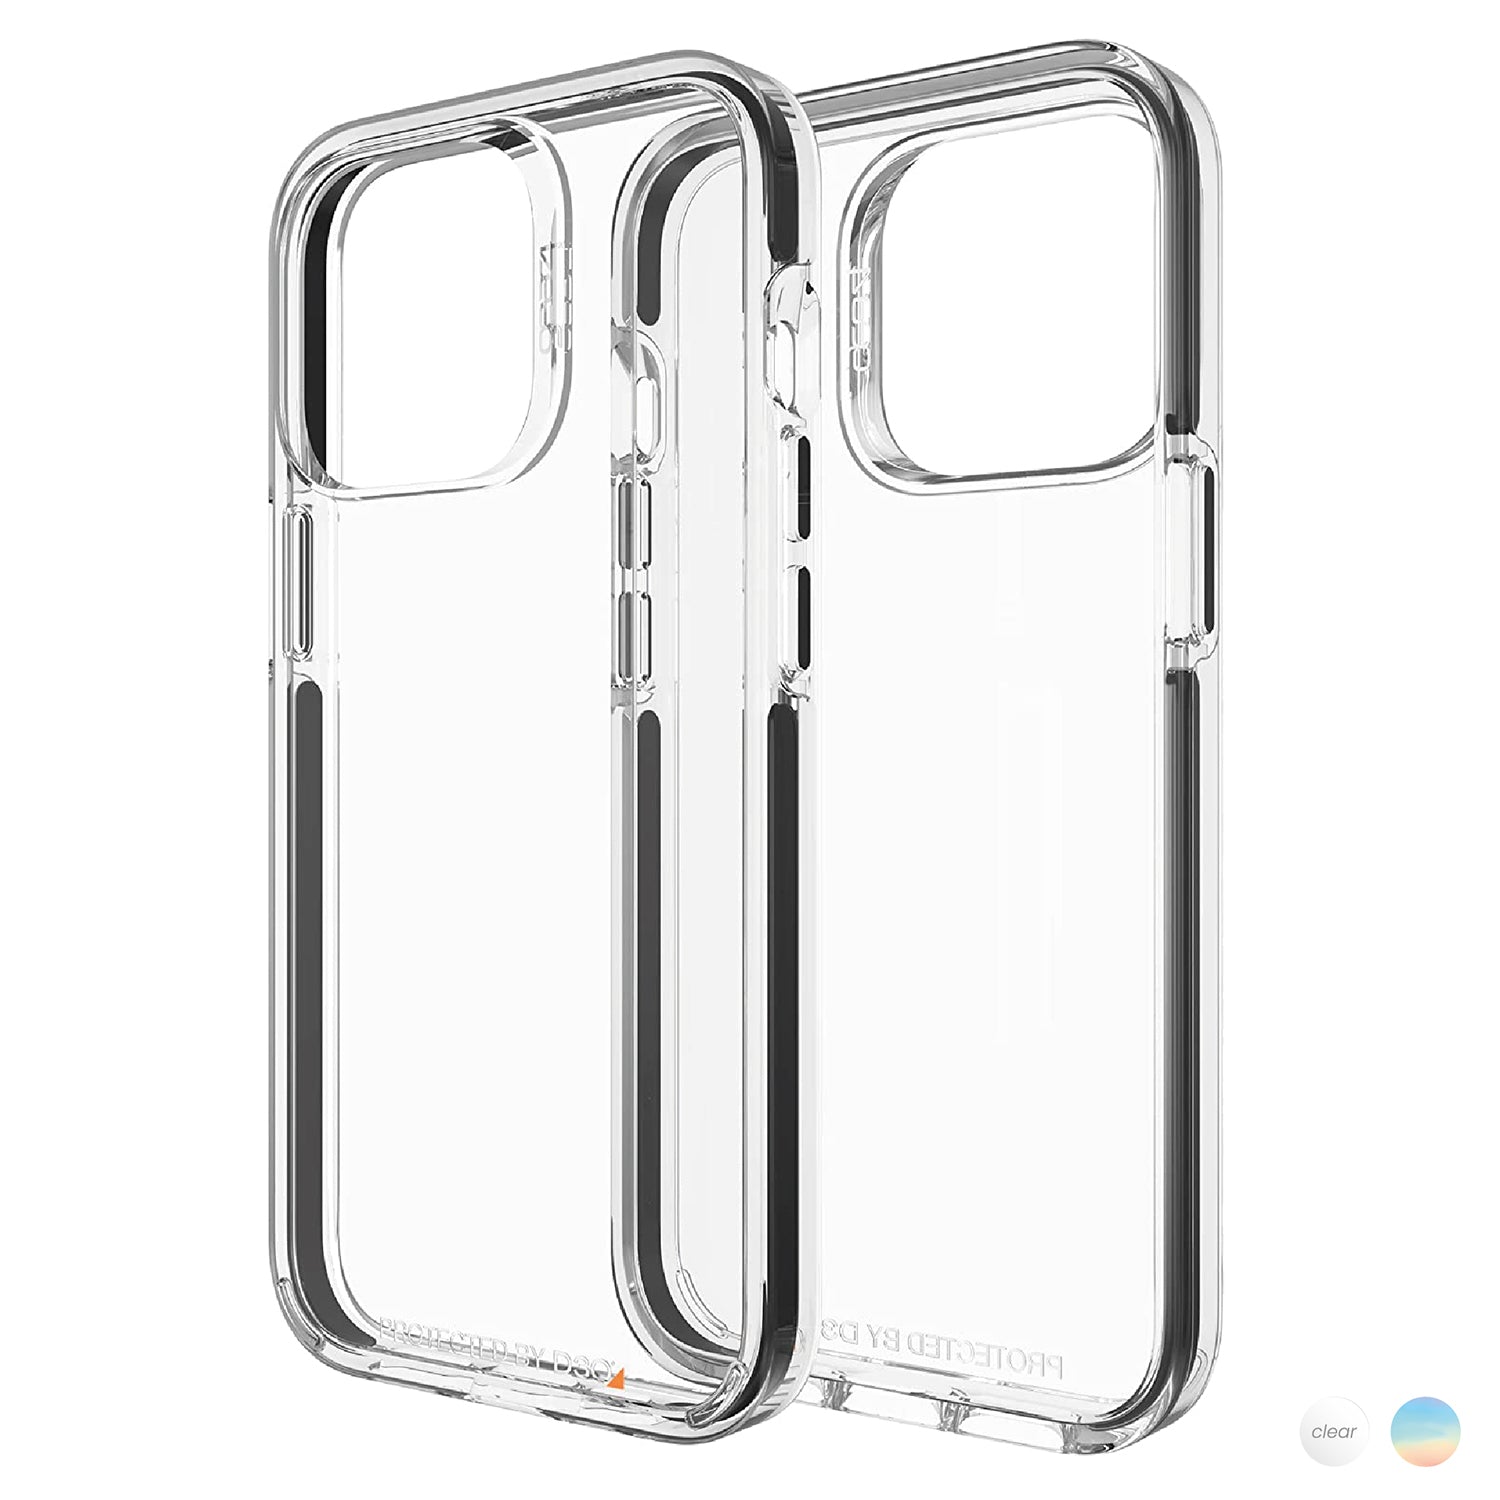 ZAGG D3O Clear Snap Case for iPhone 13 Pro 6.1" Default ZAGG 